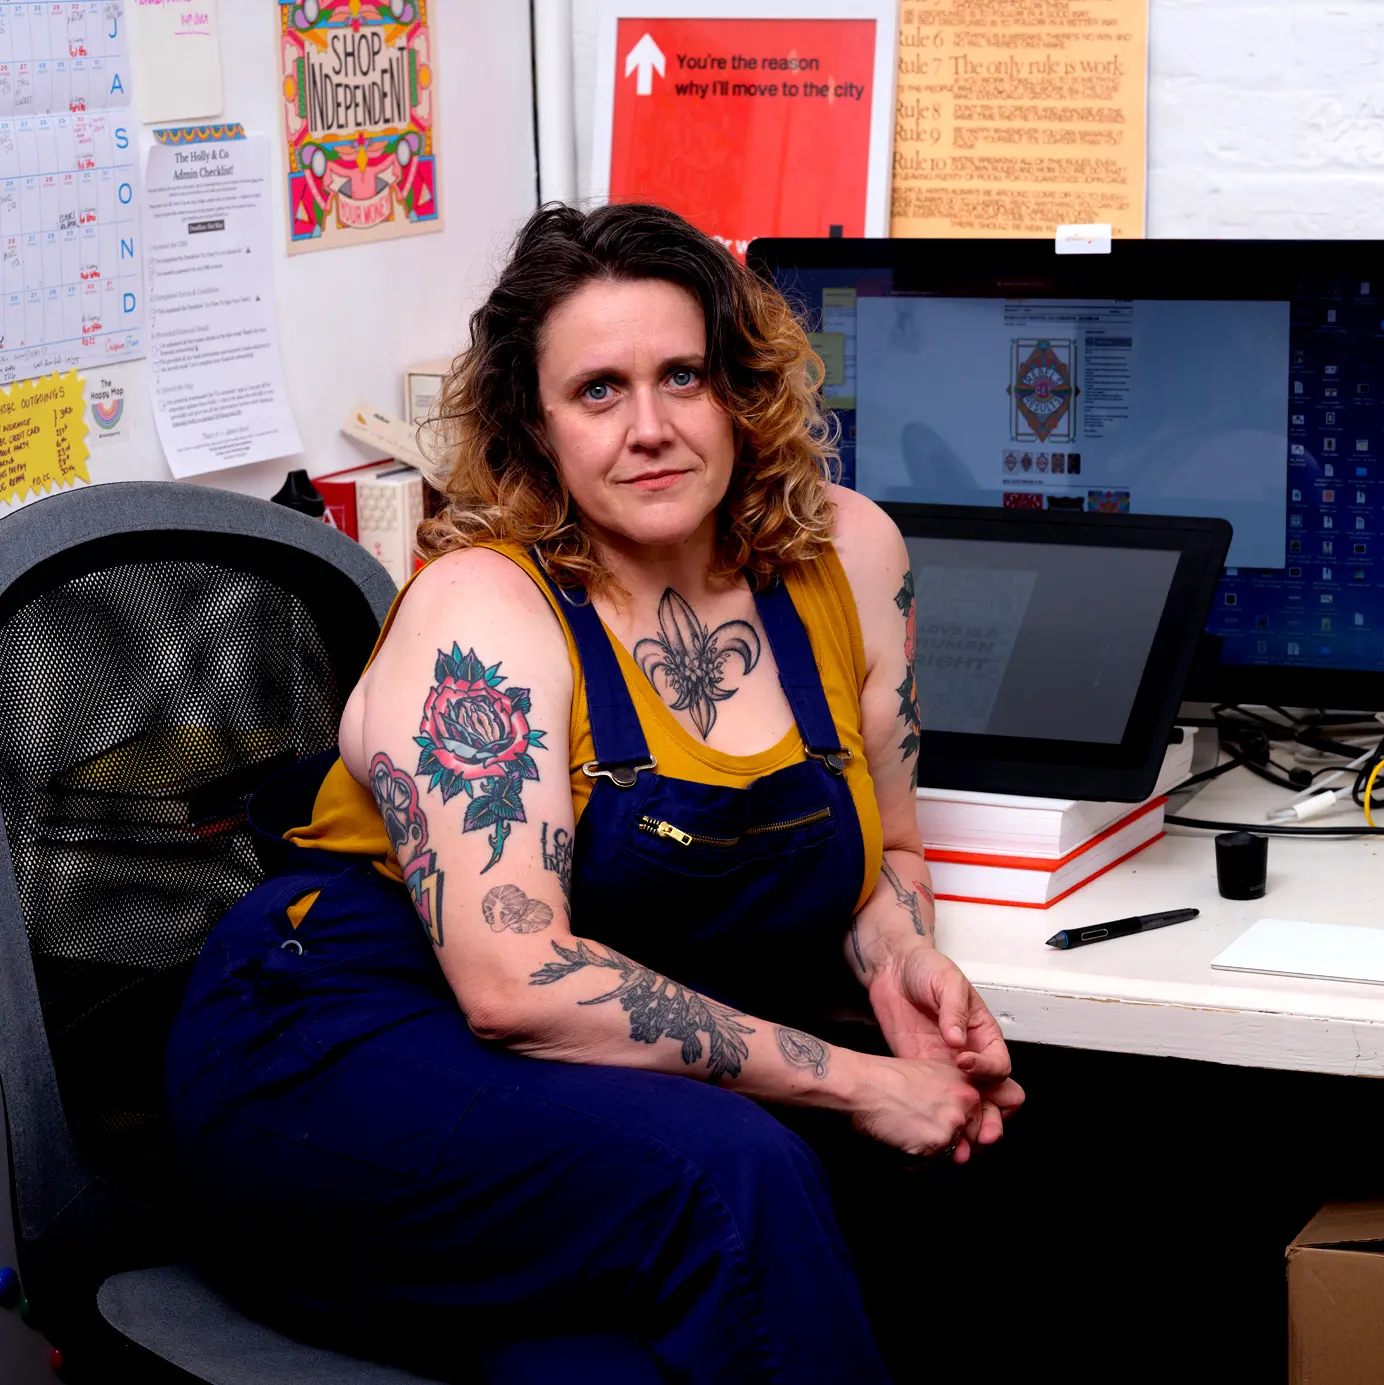 Picture show Rebecca sitting at her studio desk in Margate. There is a computer and drawing tablet just behind her and colourful pictures stuck to the white walls. On her desk is a pen, a candle, a phone and mousebad. Rebecca is wearing a yellow vest and royal blue dungerees. She has curly brown and blonde hair and many colourful tattoos.